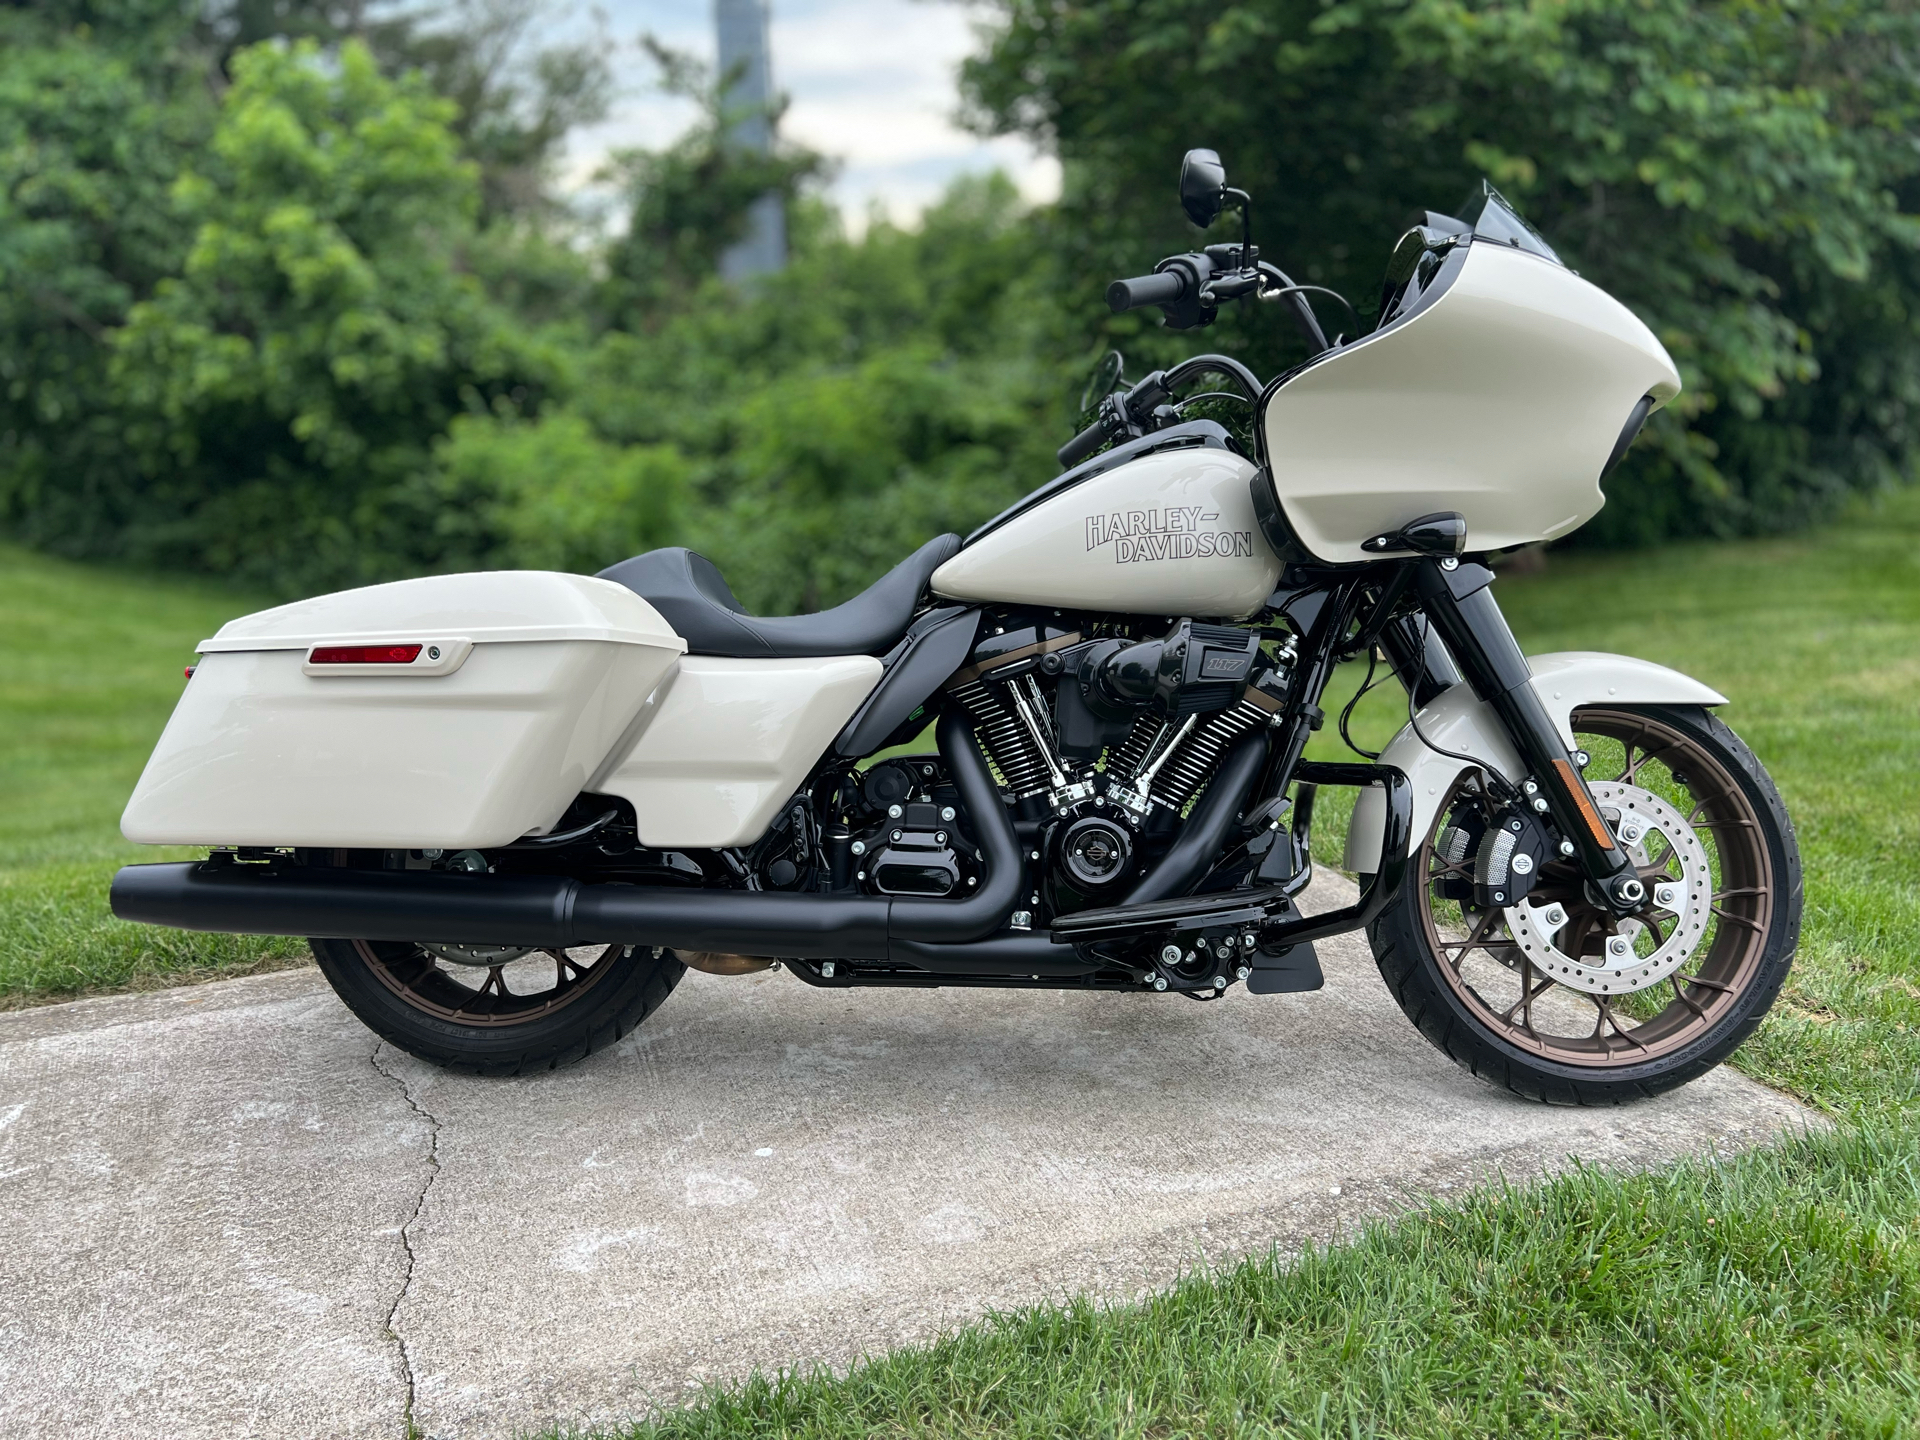 2023 Harley-Davidson Road Glide® ST in Franklin, Tennessee - Photo 1